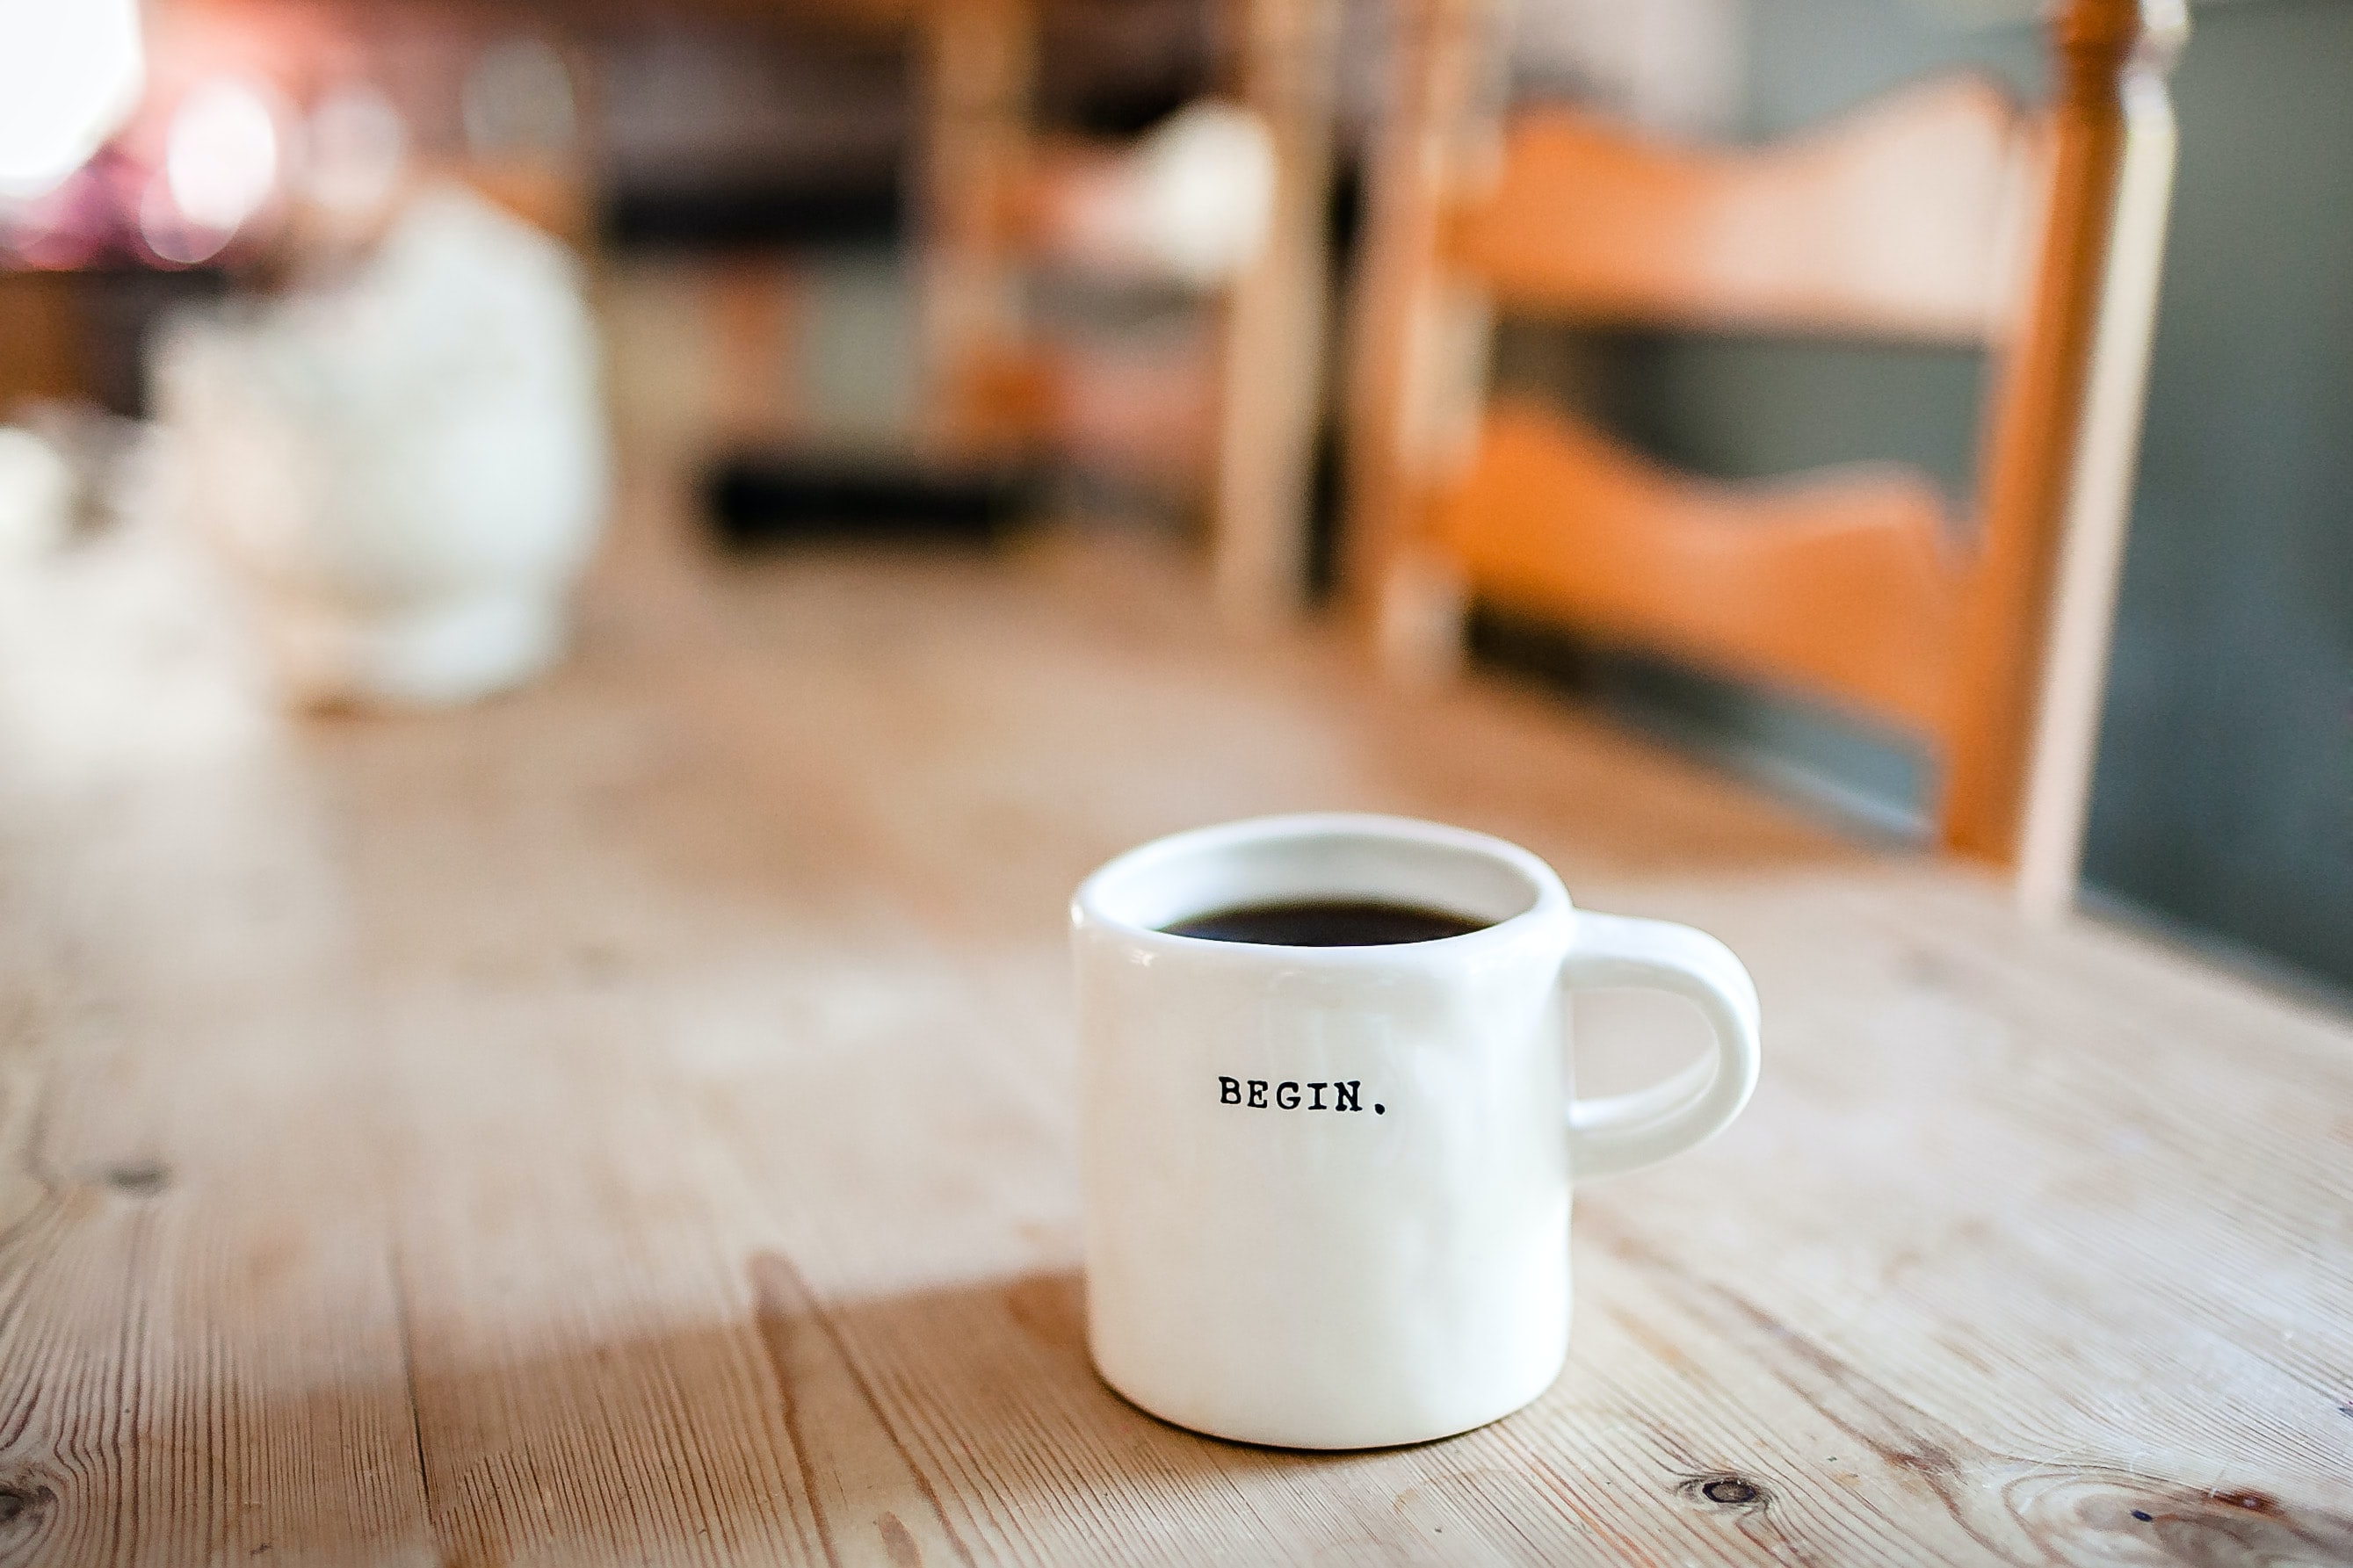 Mug on table with "To start" above